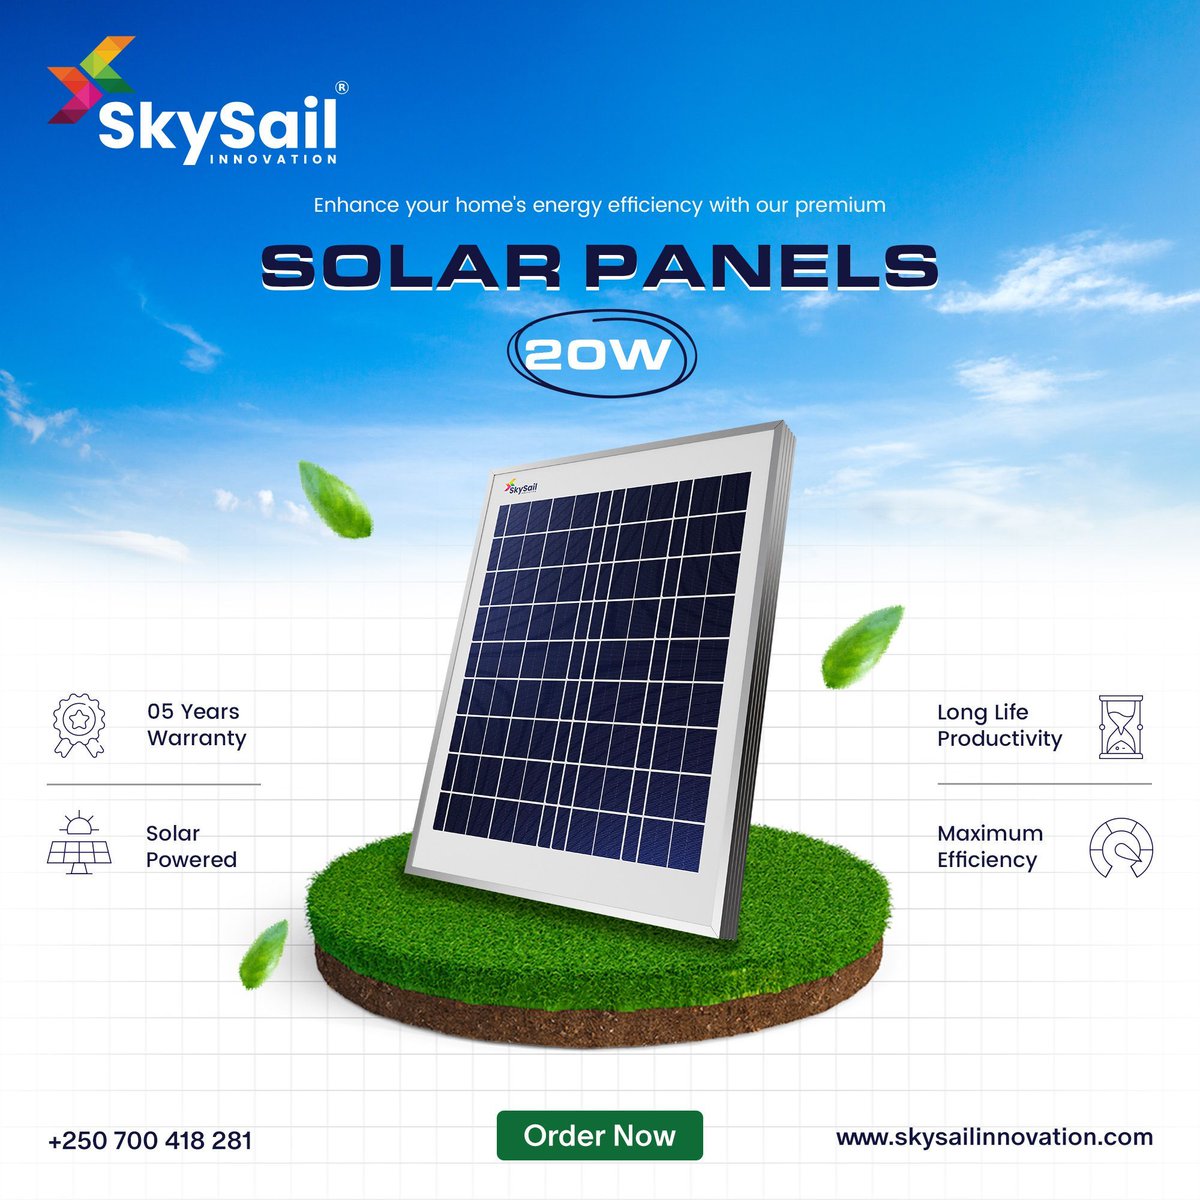 ☀️ Upgrade your home's energy game with SkySail Innovation's premium Solar Panels 20W! 🌱 Harness the power of the sun and reduce your carbon footprint. Order now and make your home eco-friendly! #SkySailInnovation #SolarEnergy #GreenLiving #EnergyEfficiency #RenewableEnergy